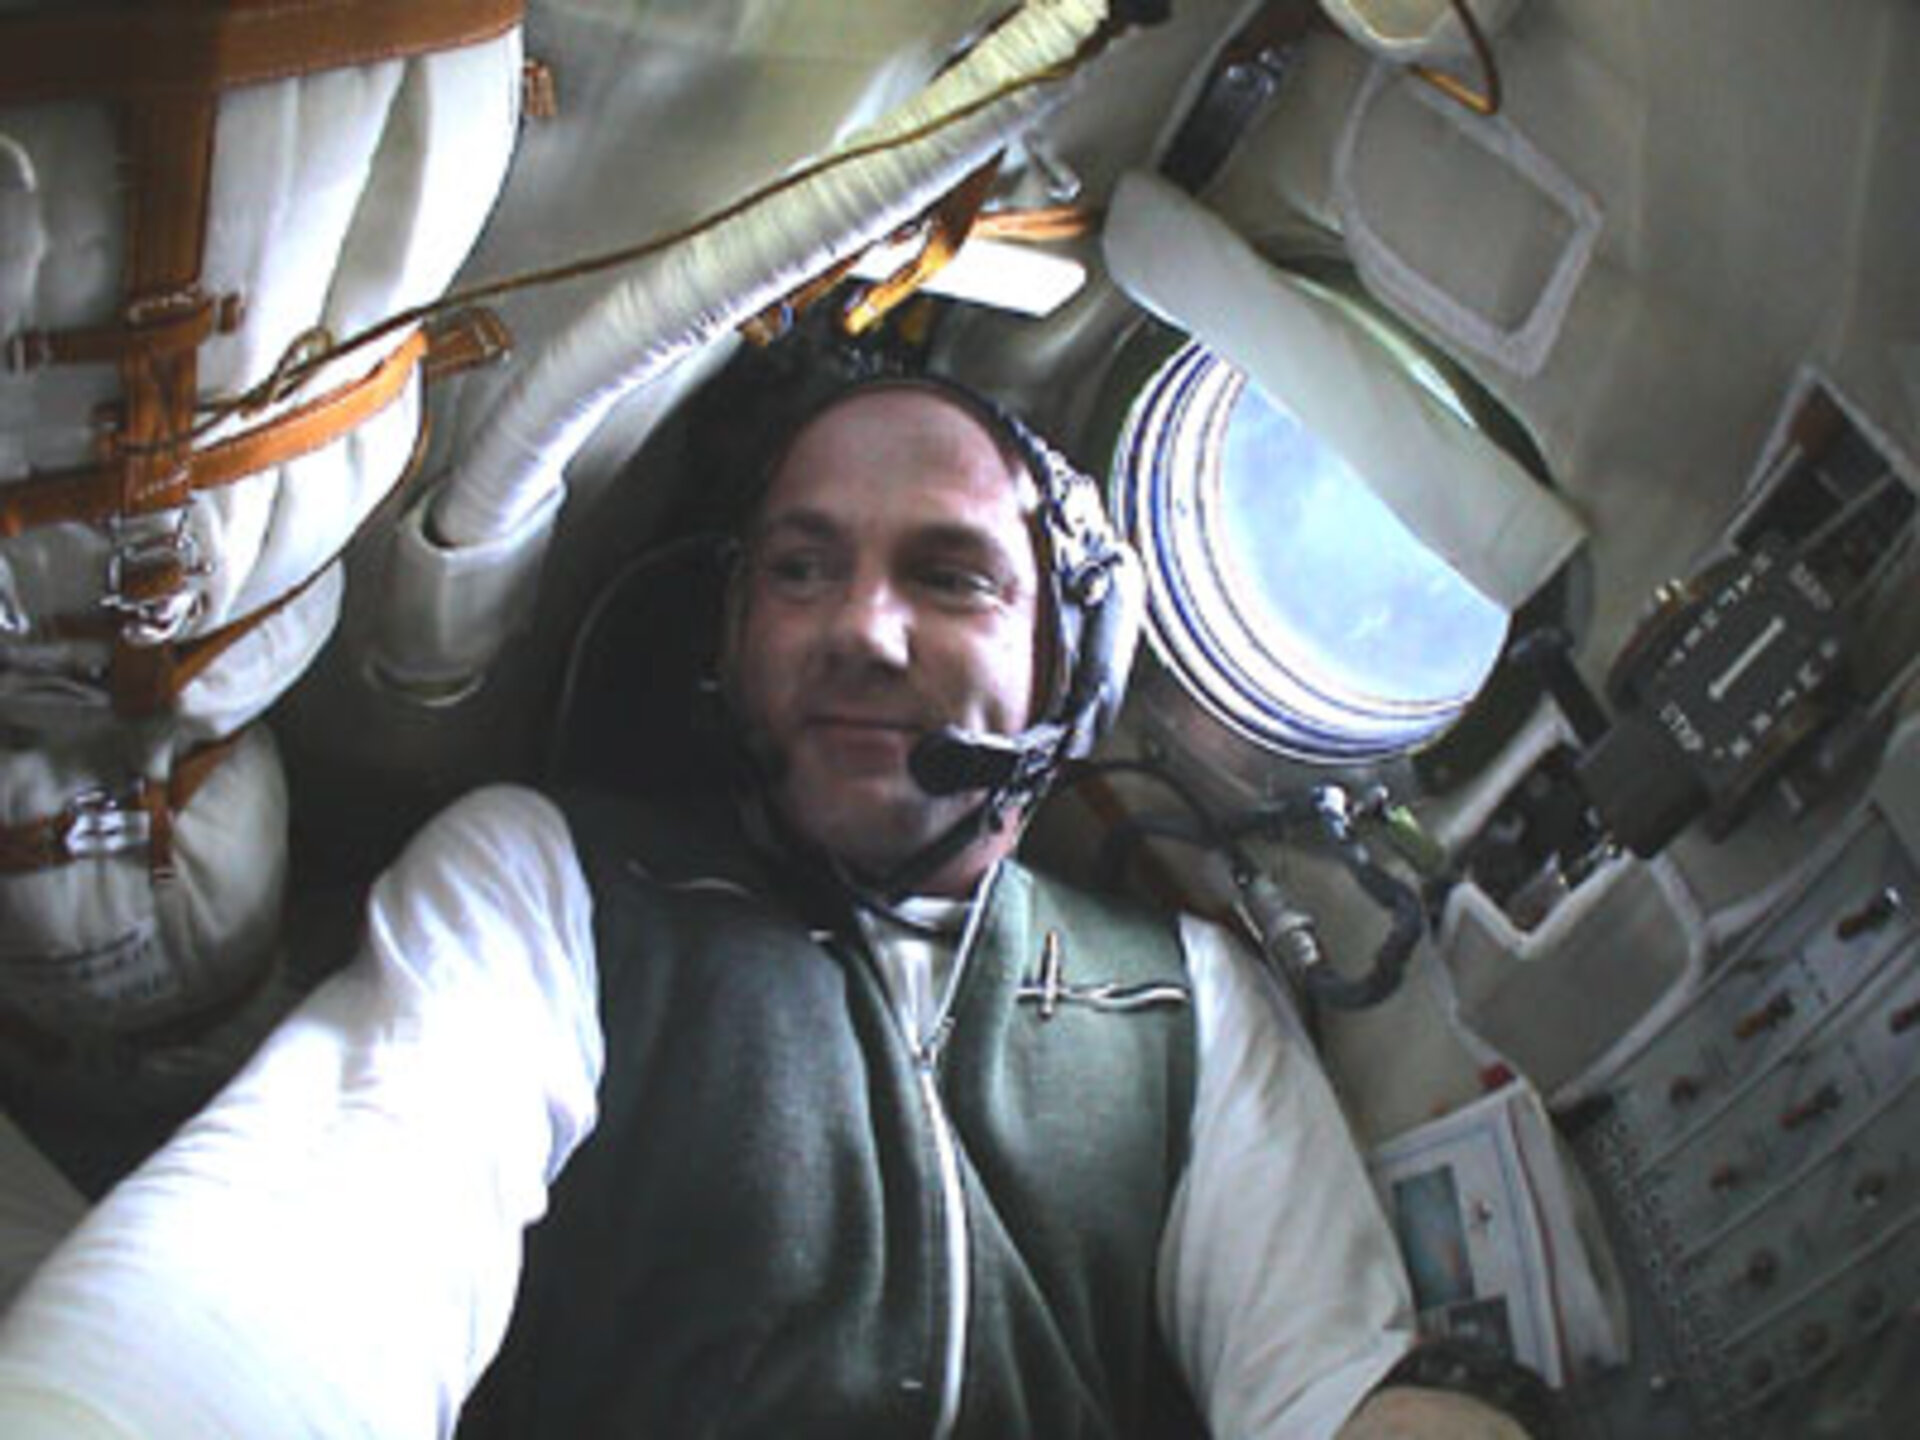 ESA astronaut André Kuipers in the Soyuz capsule after launch before reaching ISS